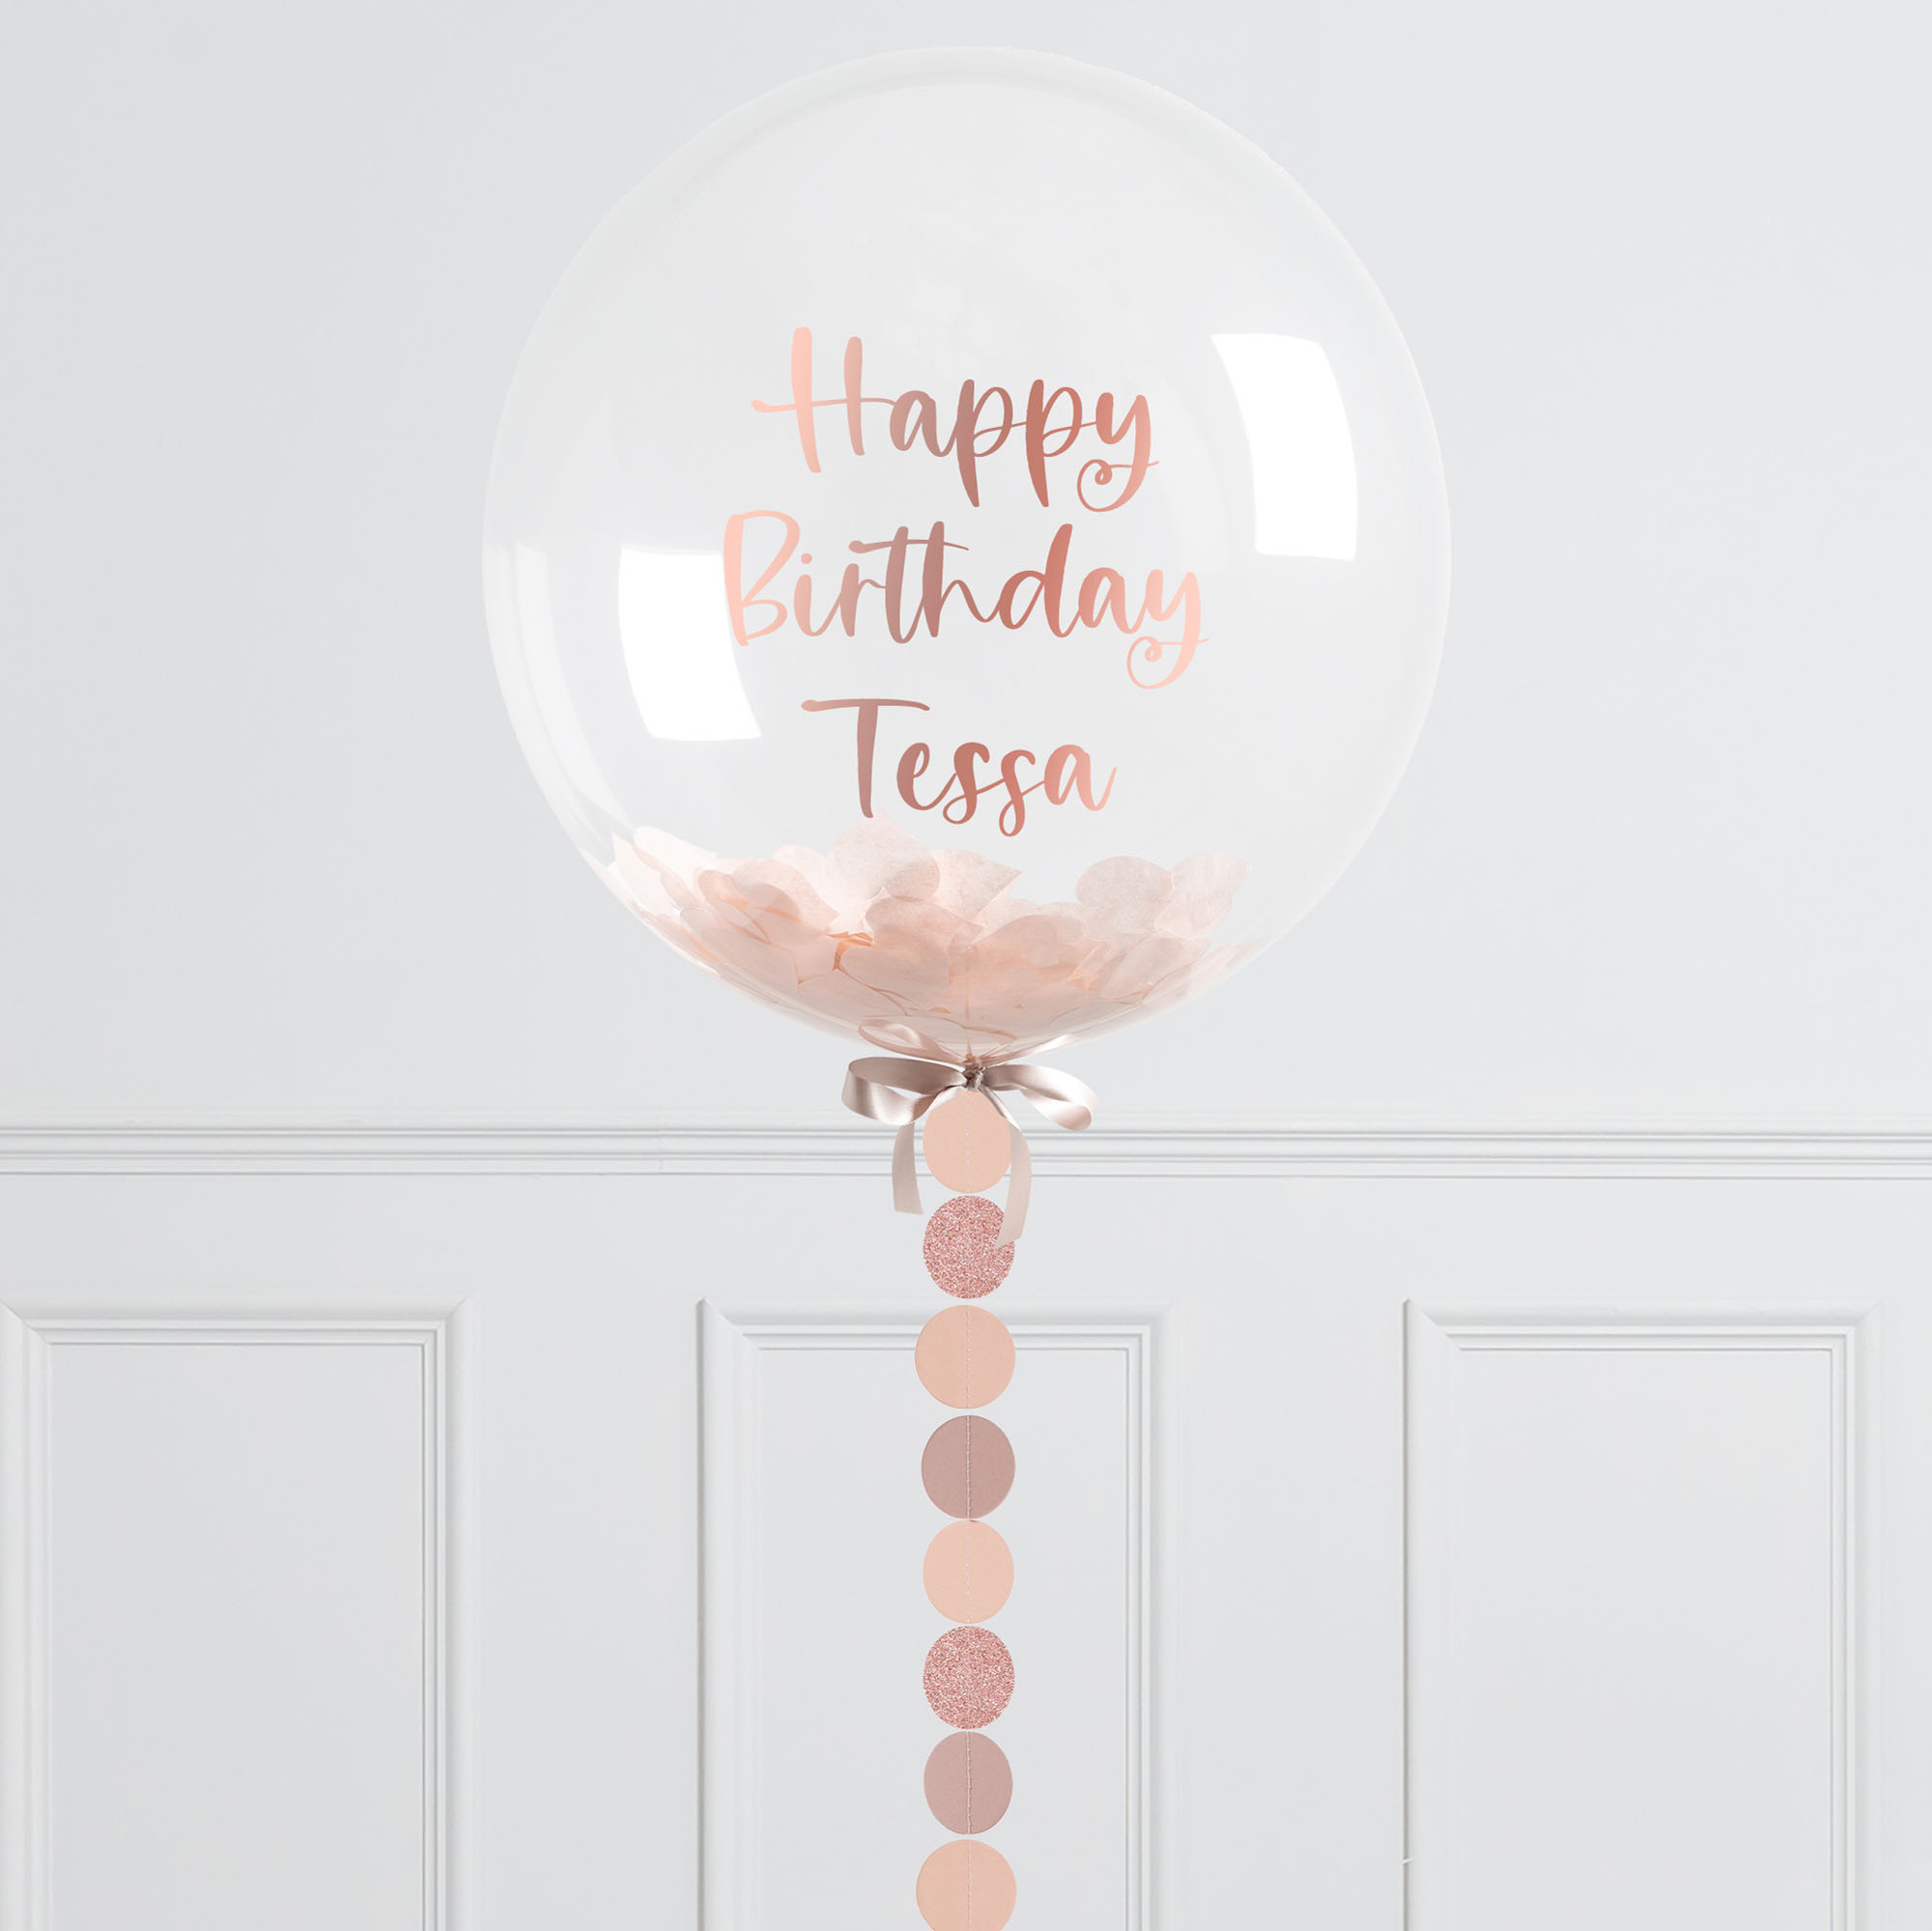 Personalised 20-Inch Rose Gold Circle Confetti Bubblegum Balloon - DELIVERED INFLATED!